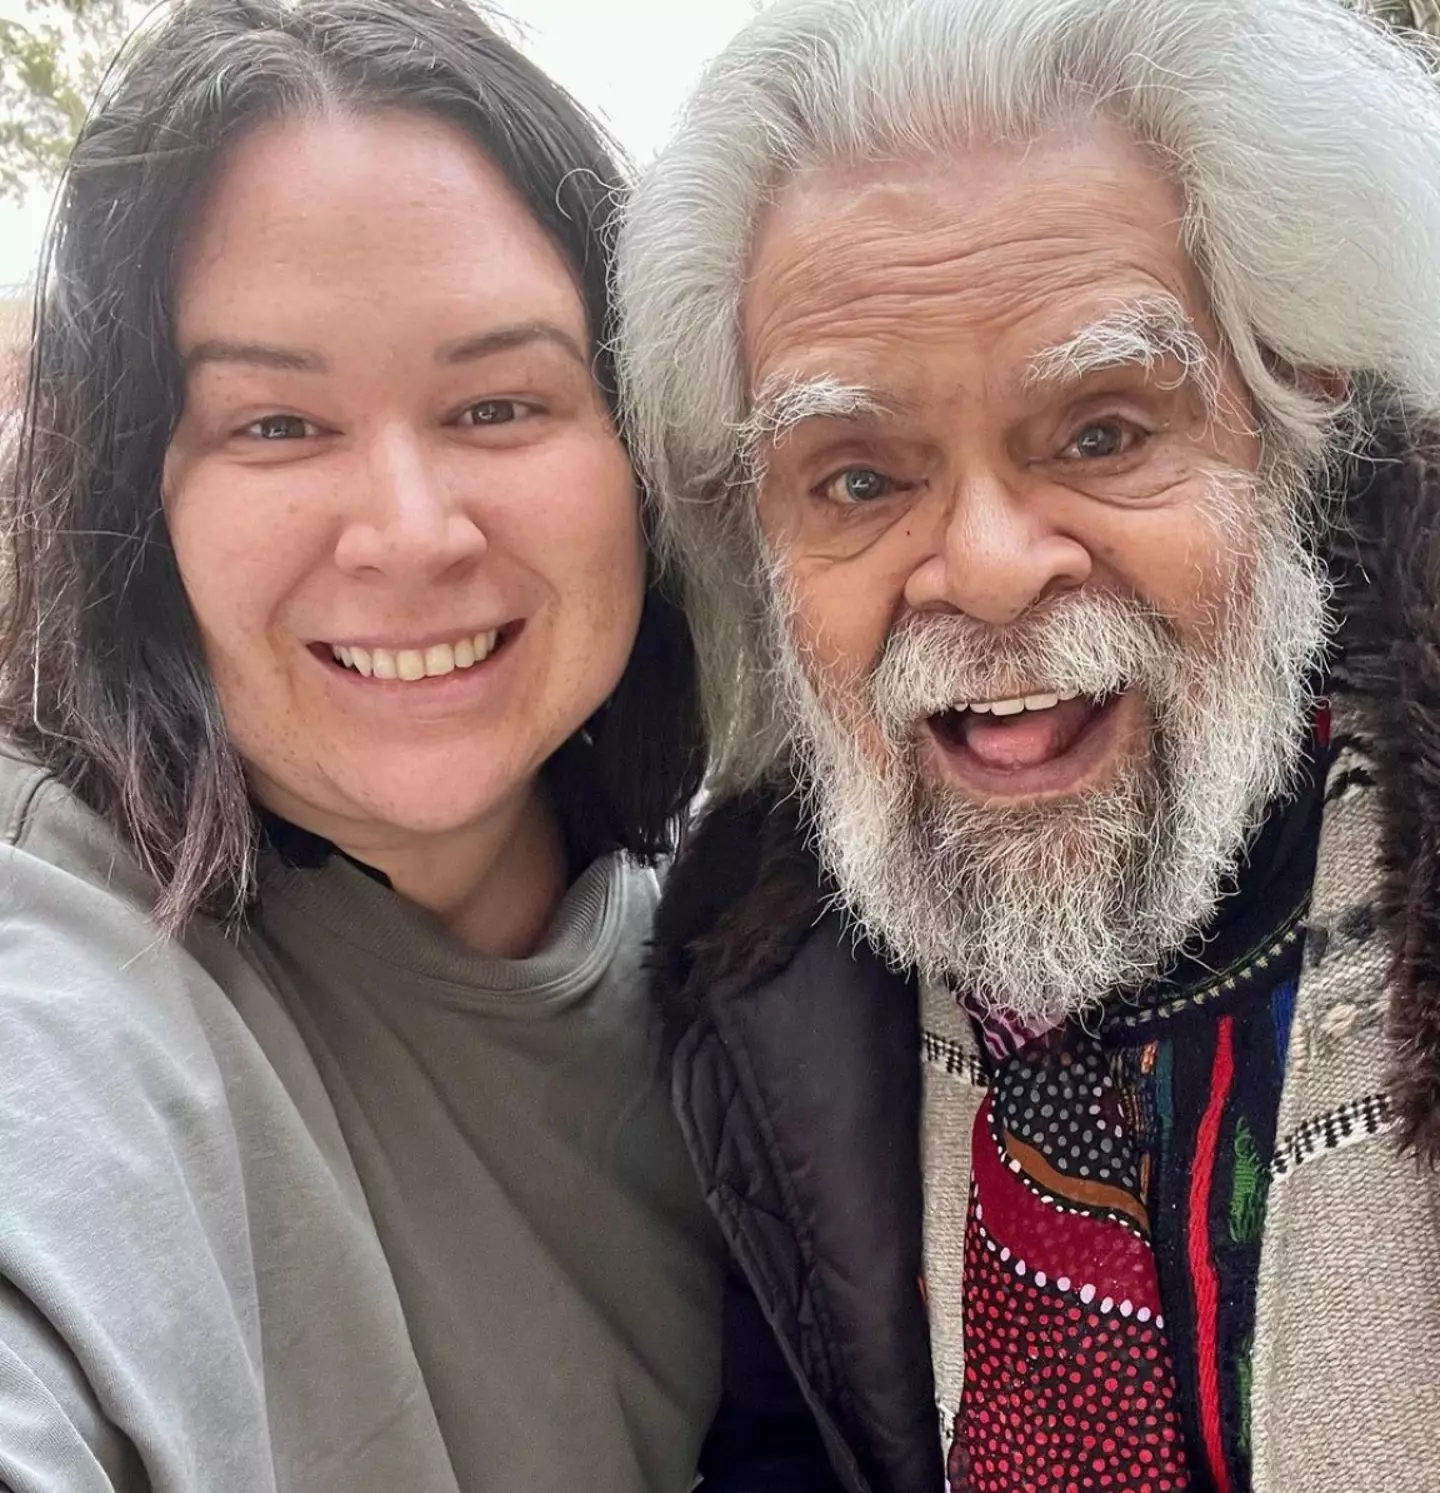 Uncle Jack Charles was left shocked after receiving a 'distressing' phone call from a staff member of the Stolen Generations Advisory Committee (SGAC).